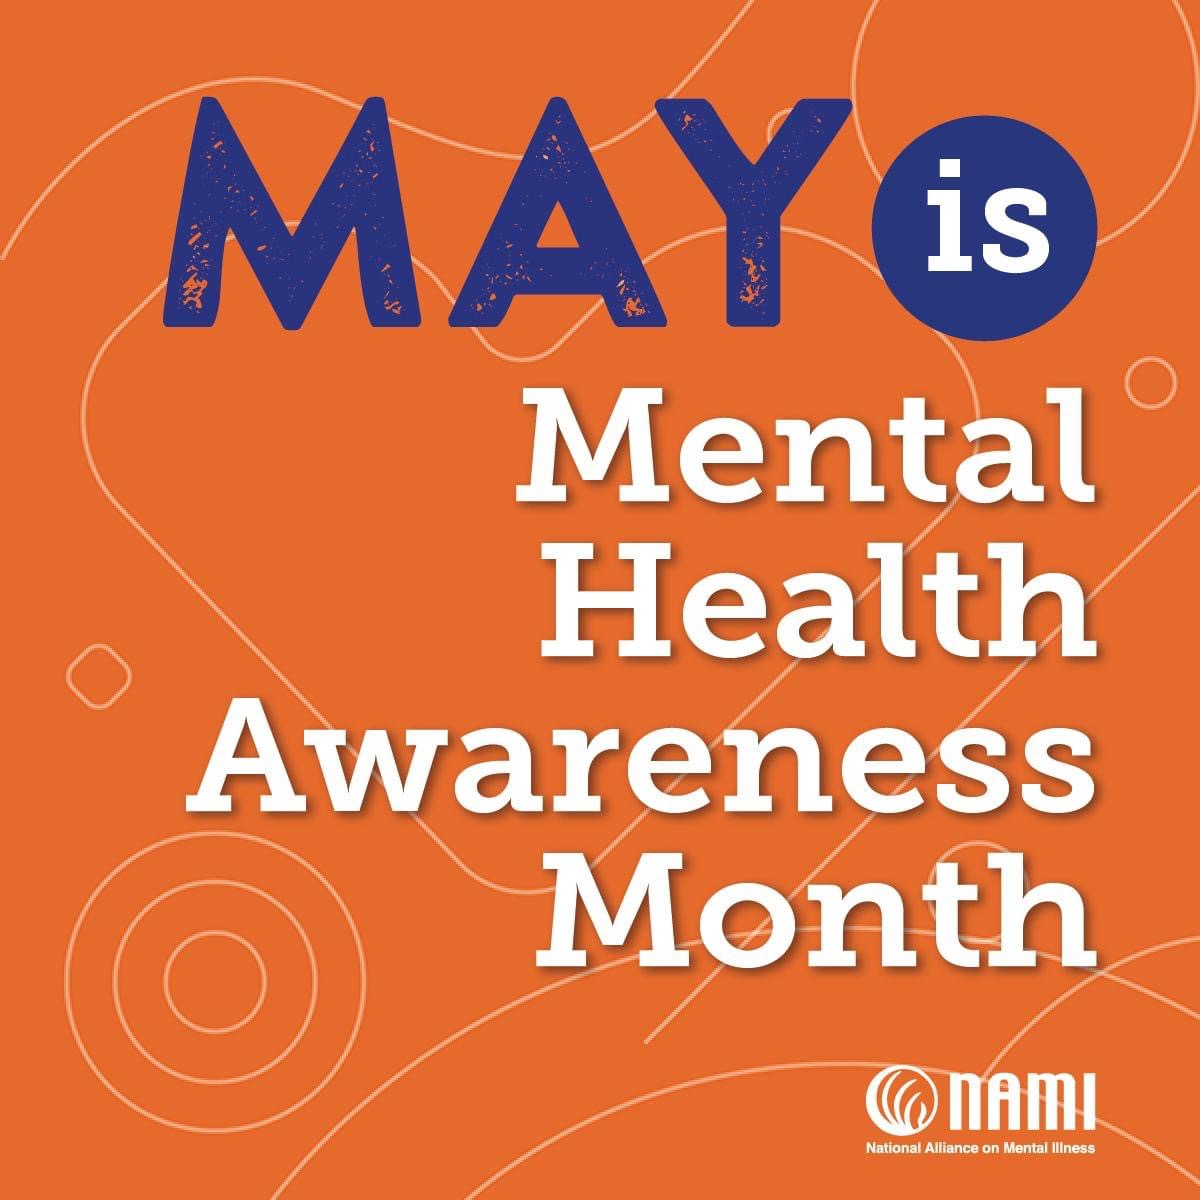 It's our favorite month of the year! Join us this #MentalHealthAwarenessMonth by agreeing to #TakeTheMoment to prioritize your mental health. 

Learn more about getting engaged this month at nami.org/mham

#Together4MH #gapol